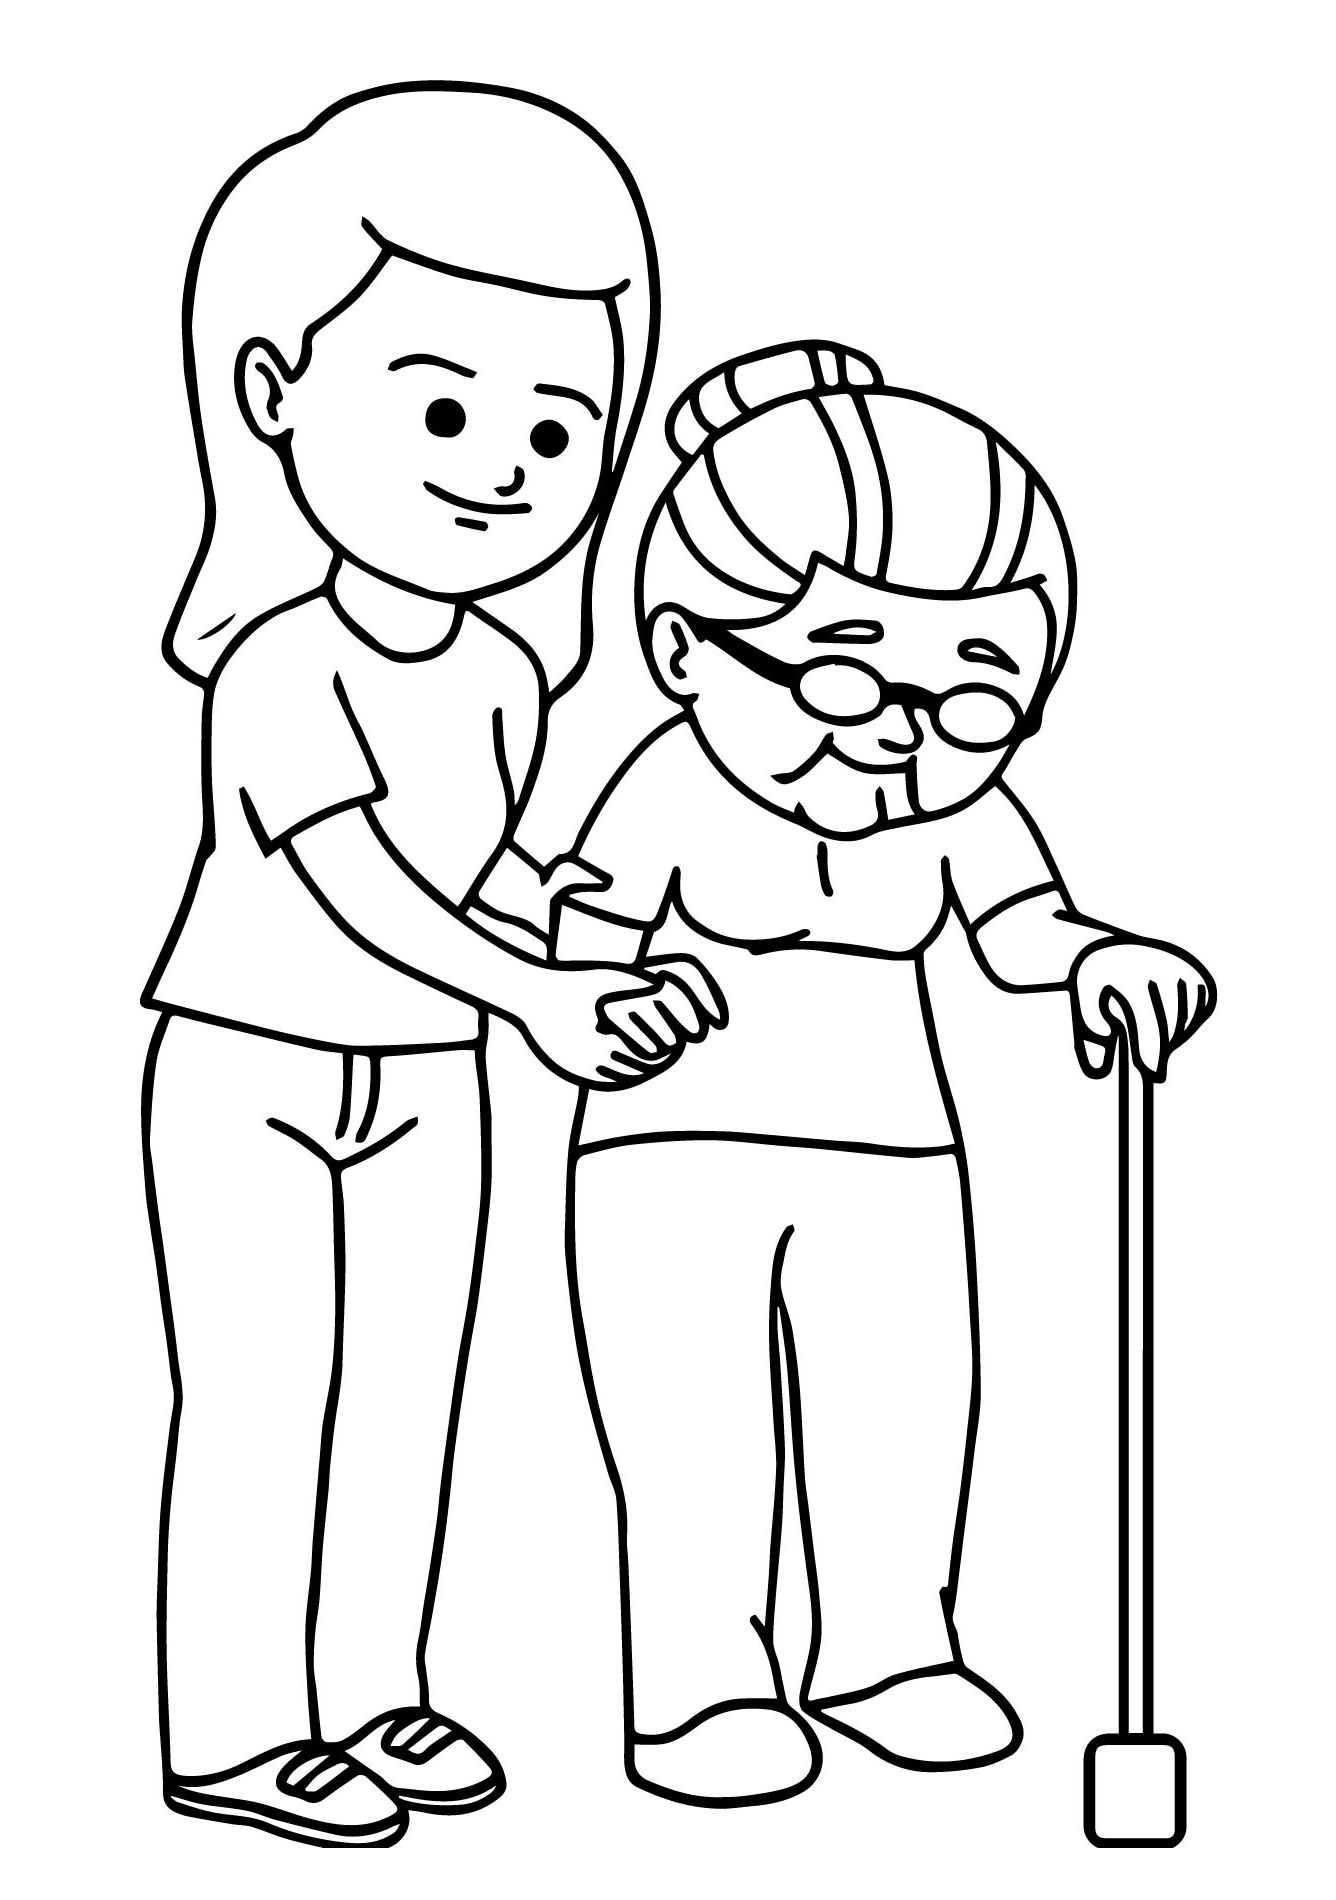 random acts of kindness coloring pages